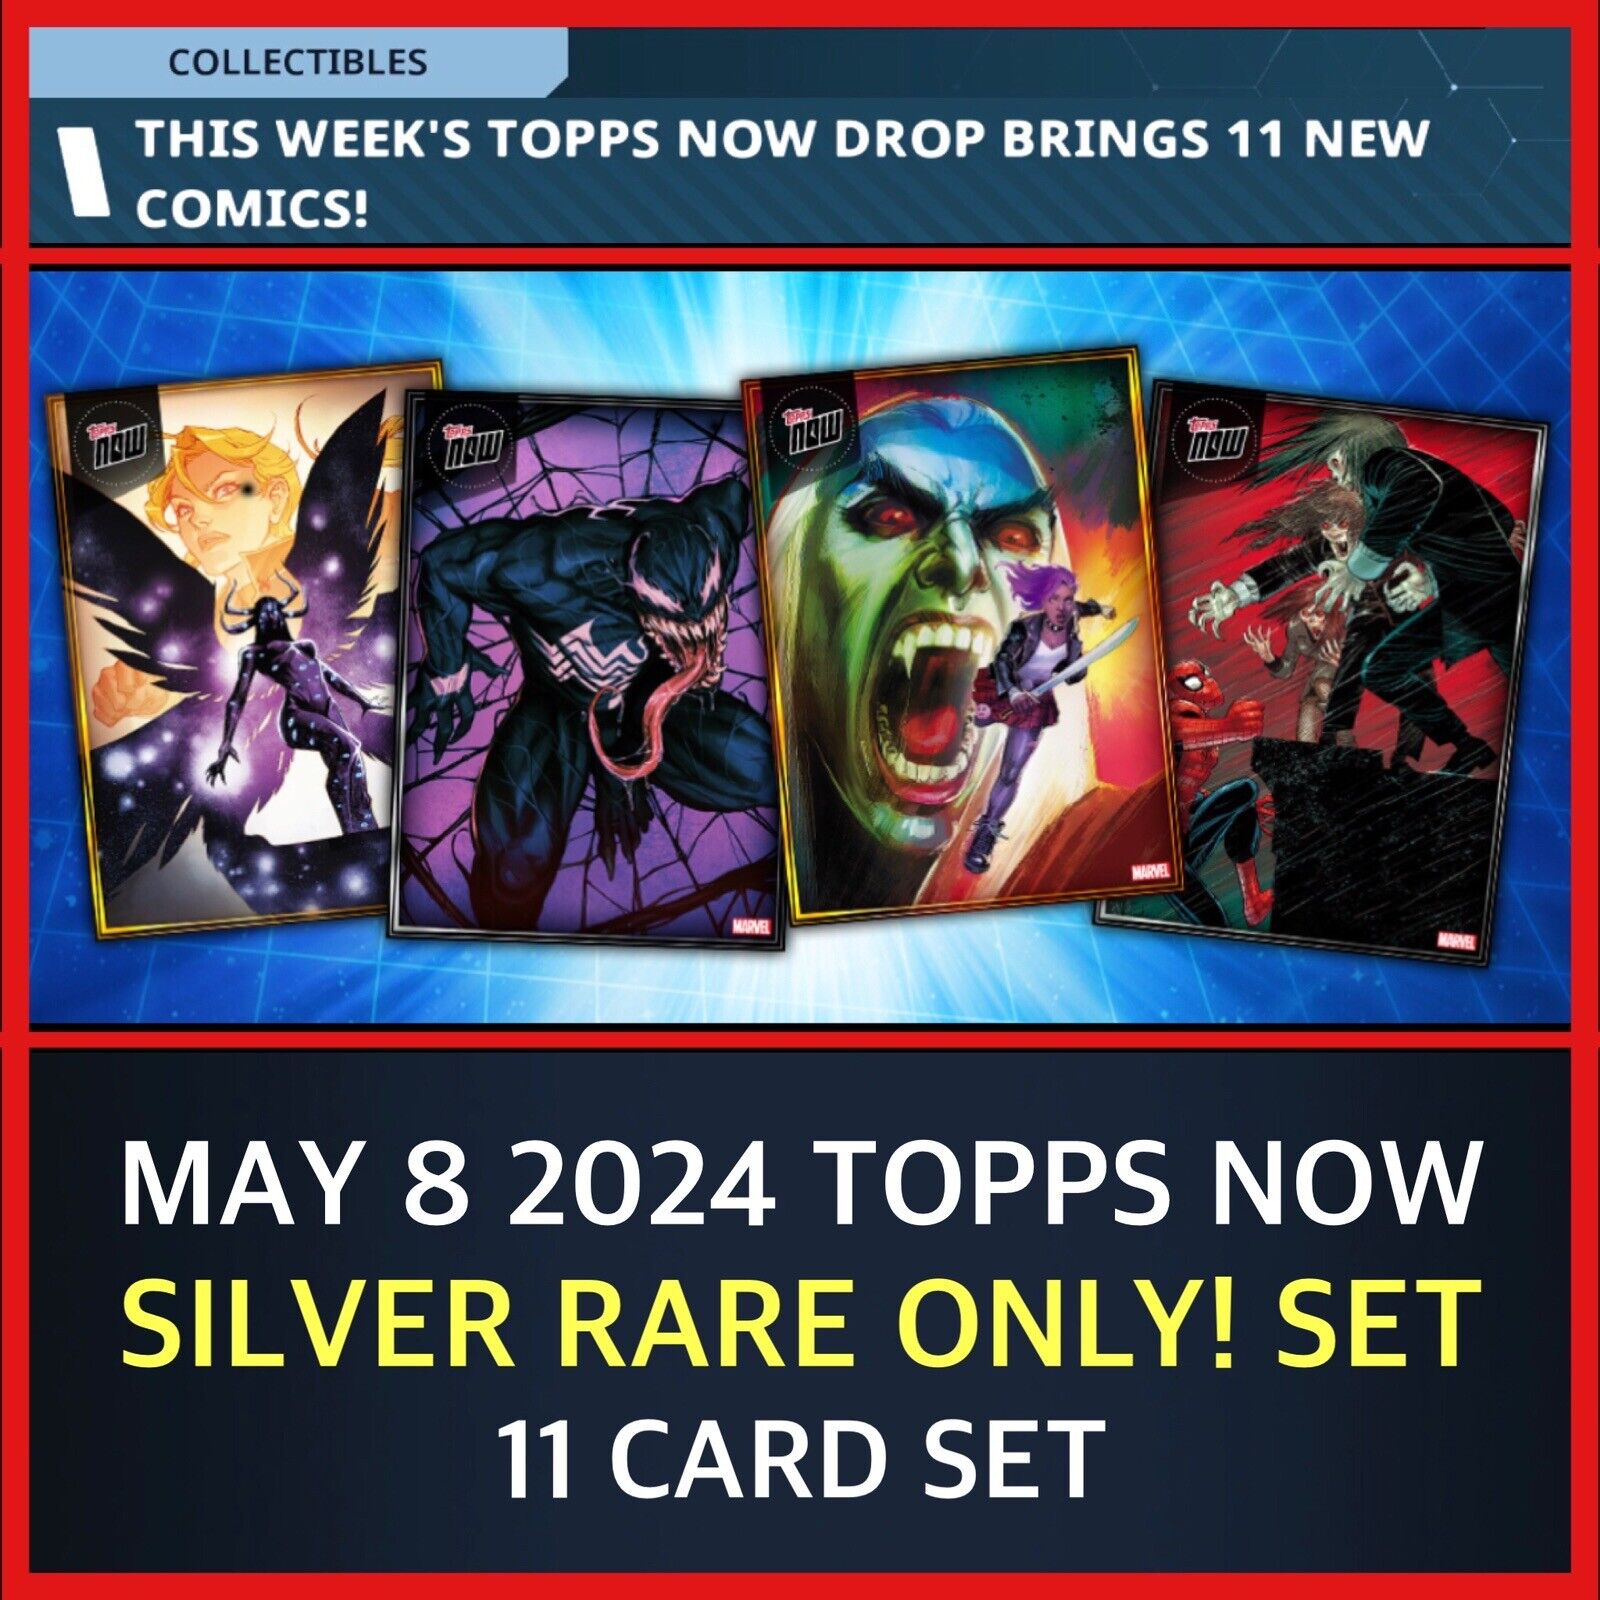 TOPPS MARVEL COLLECT DIGITAL-TOPPS NOW MAY 8 2024-SILVER RARE ONLY 11 CARD SET